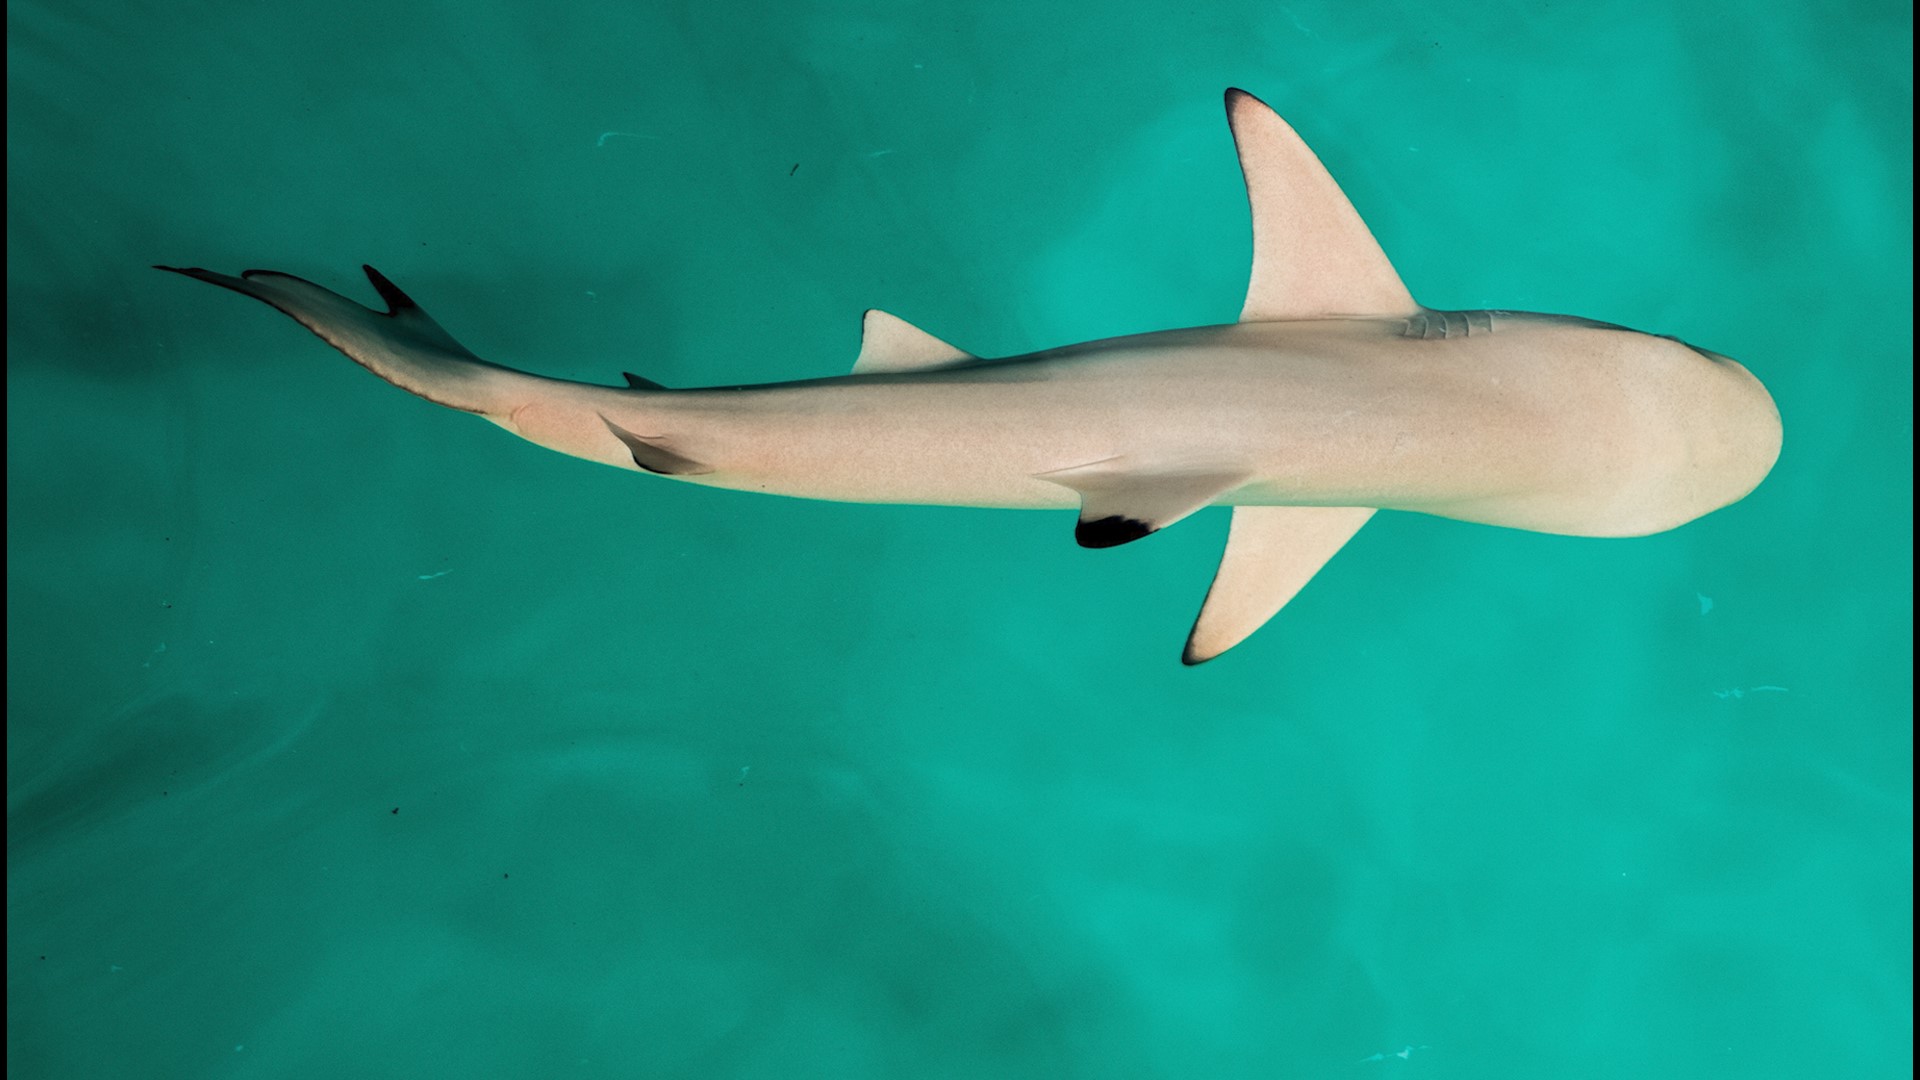 Sharks are incredible animals and now researchers have found one more thing that makes them so special: they use the Earth's magnetic fields to navigate through the oceans like a 'natural' GPS. AmazeLab's Johana Restrepo has more.